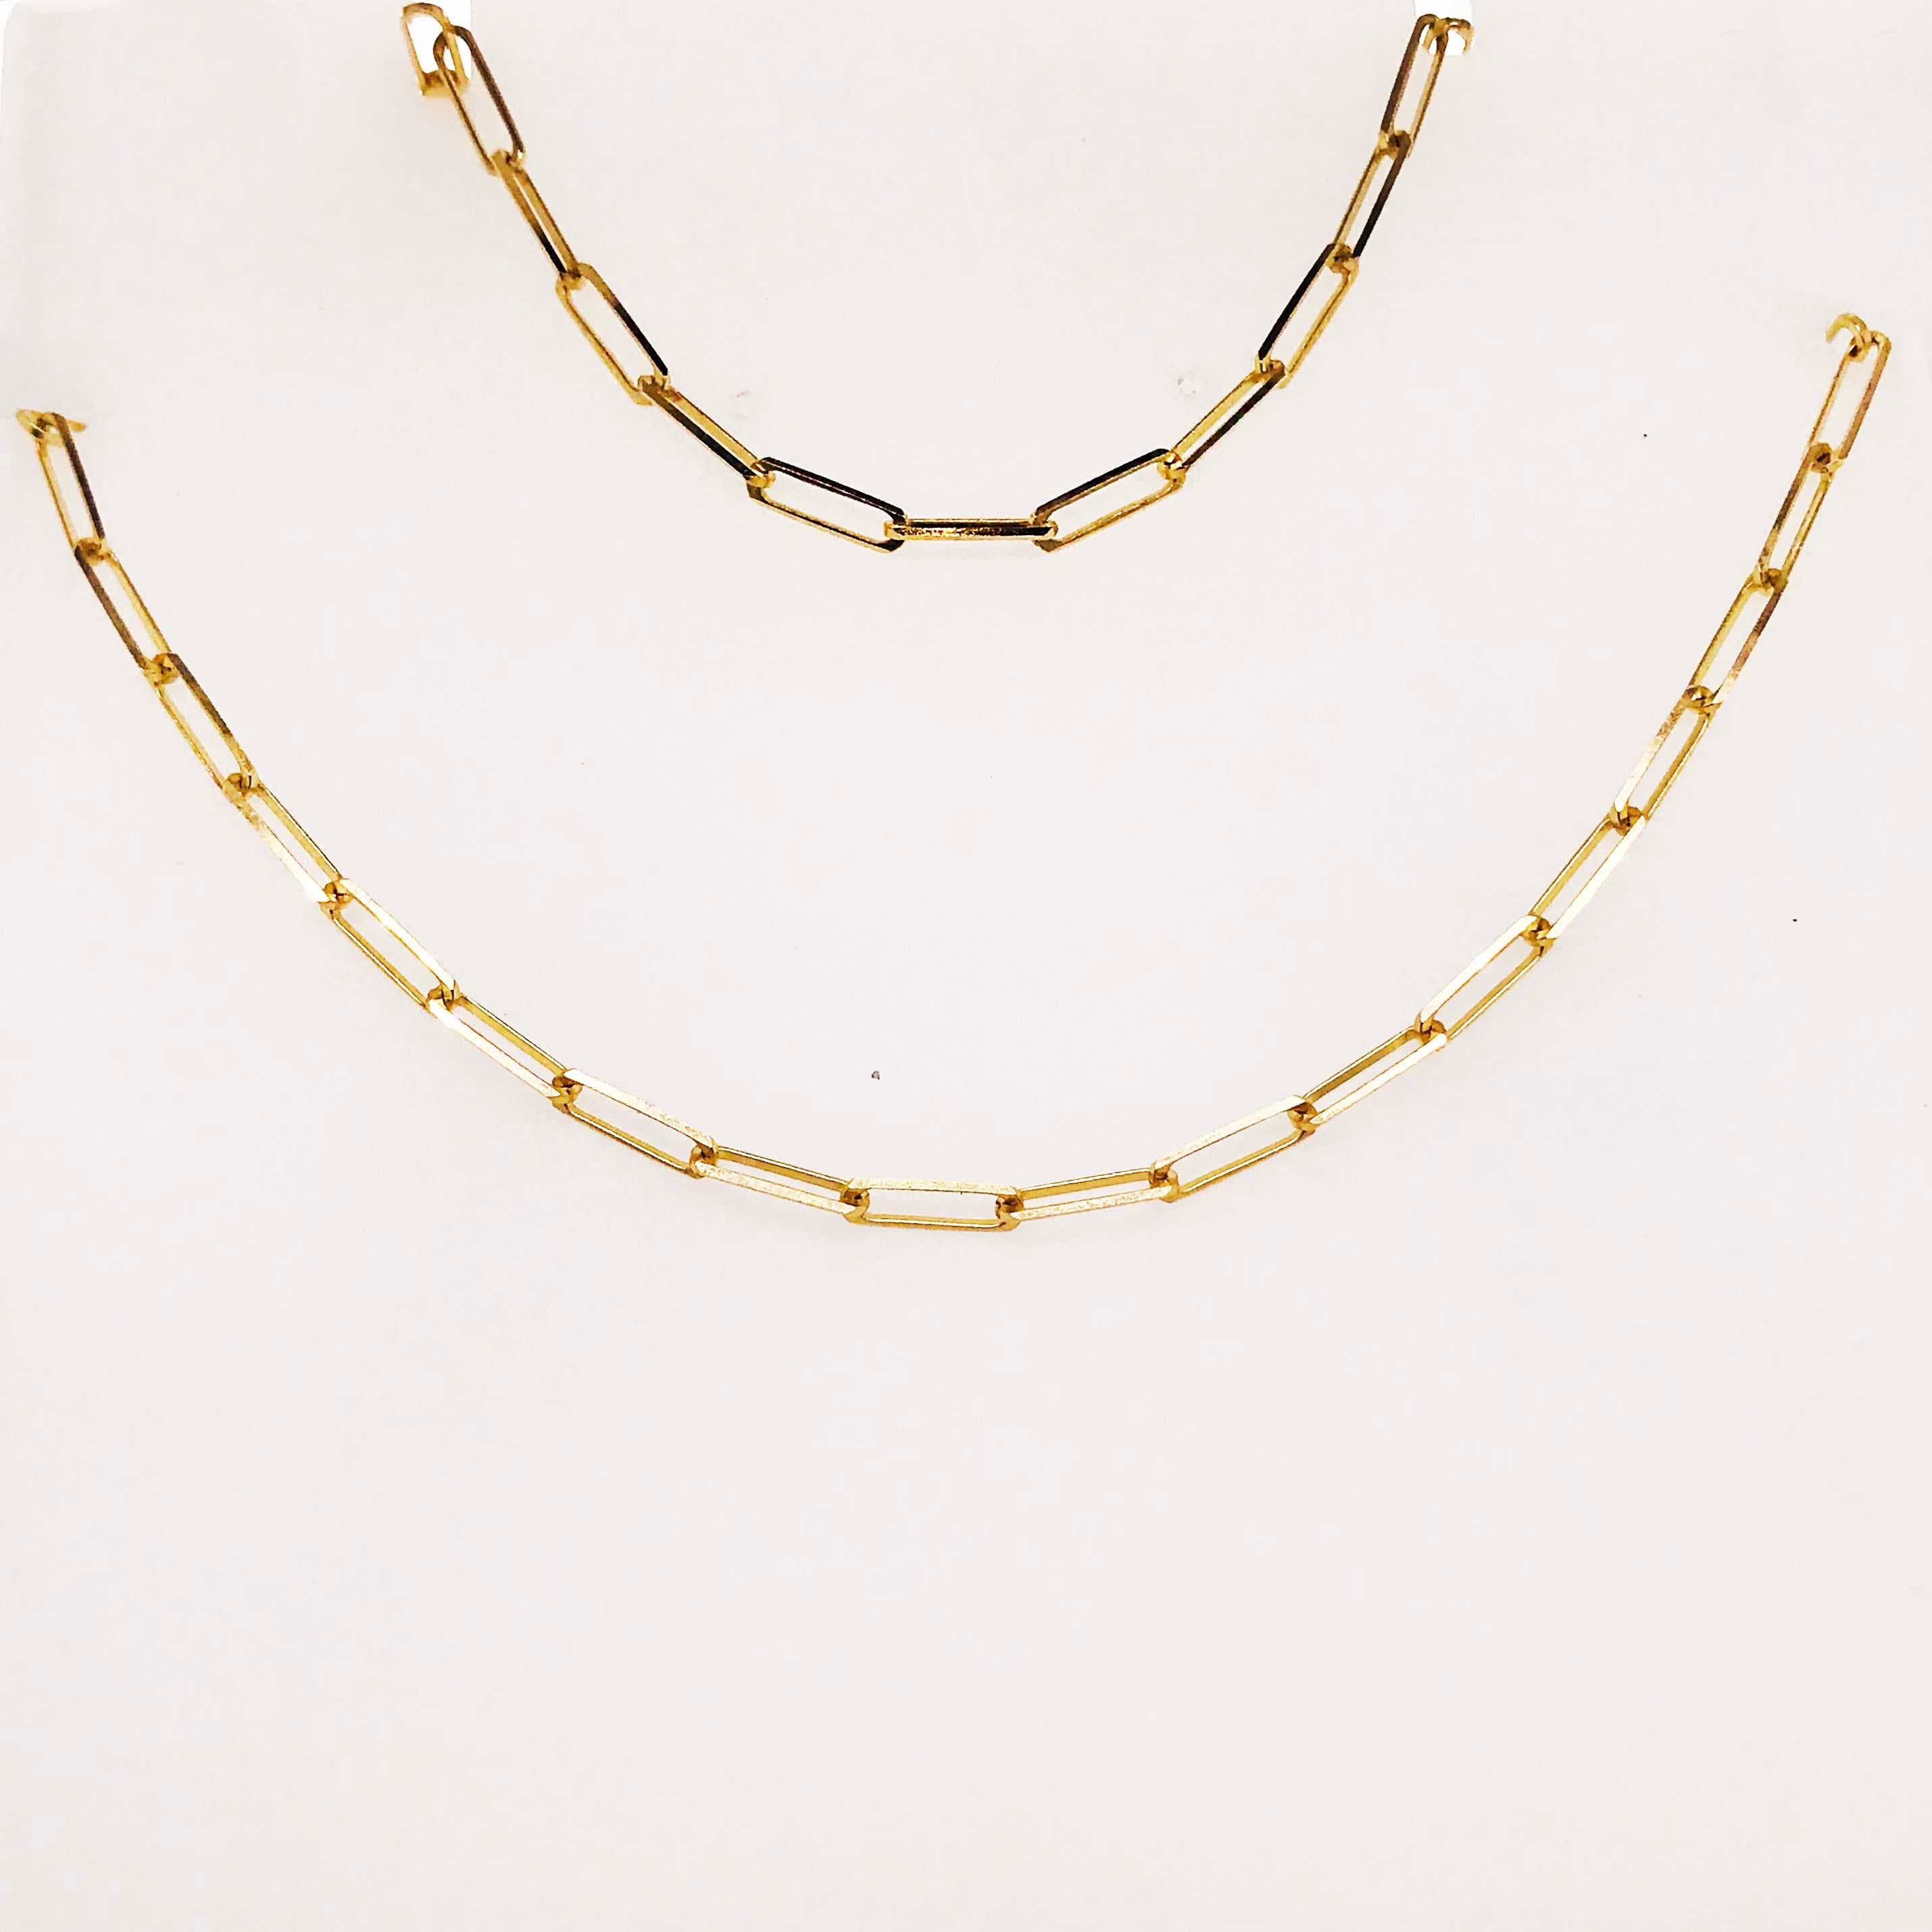 Modern Paperclip Link Chain Necklace in 14 Karat Yellow Gold, 14 Karat Paperclip